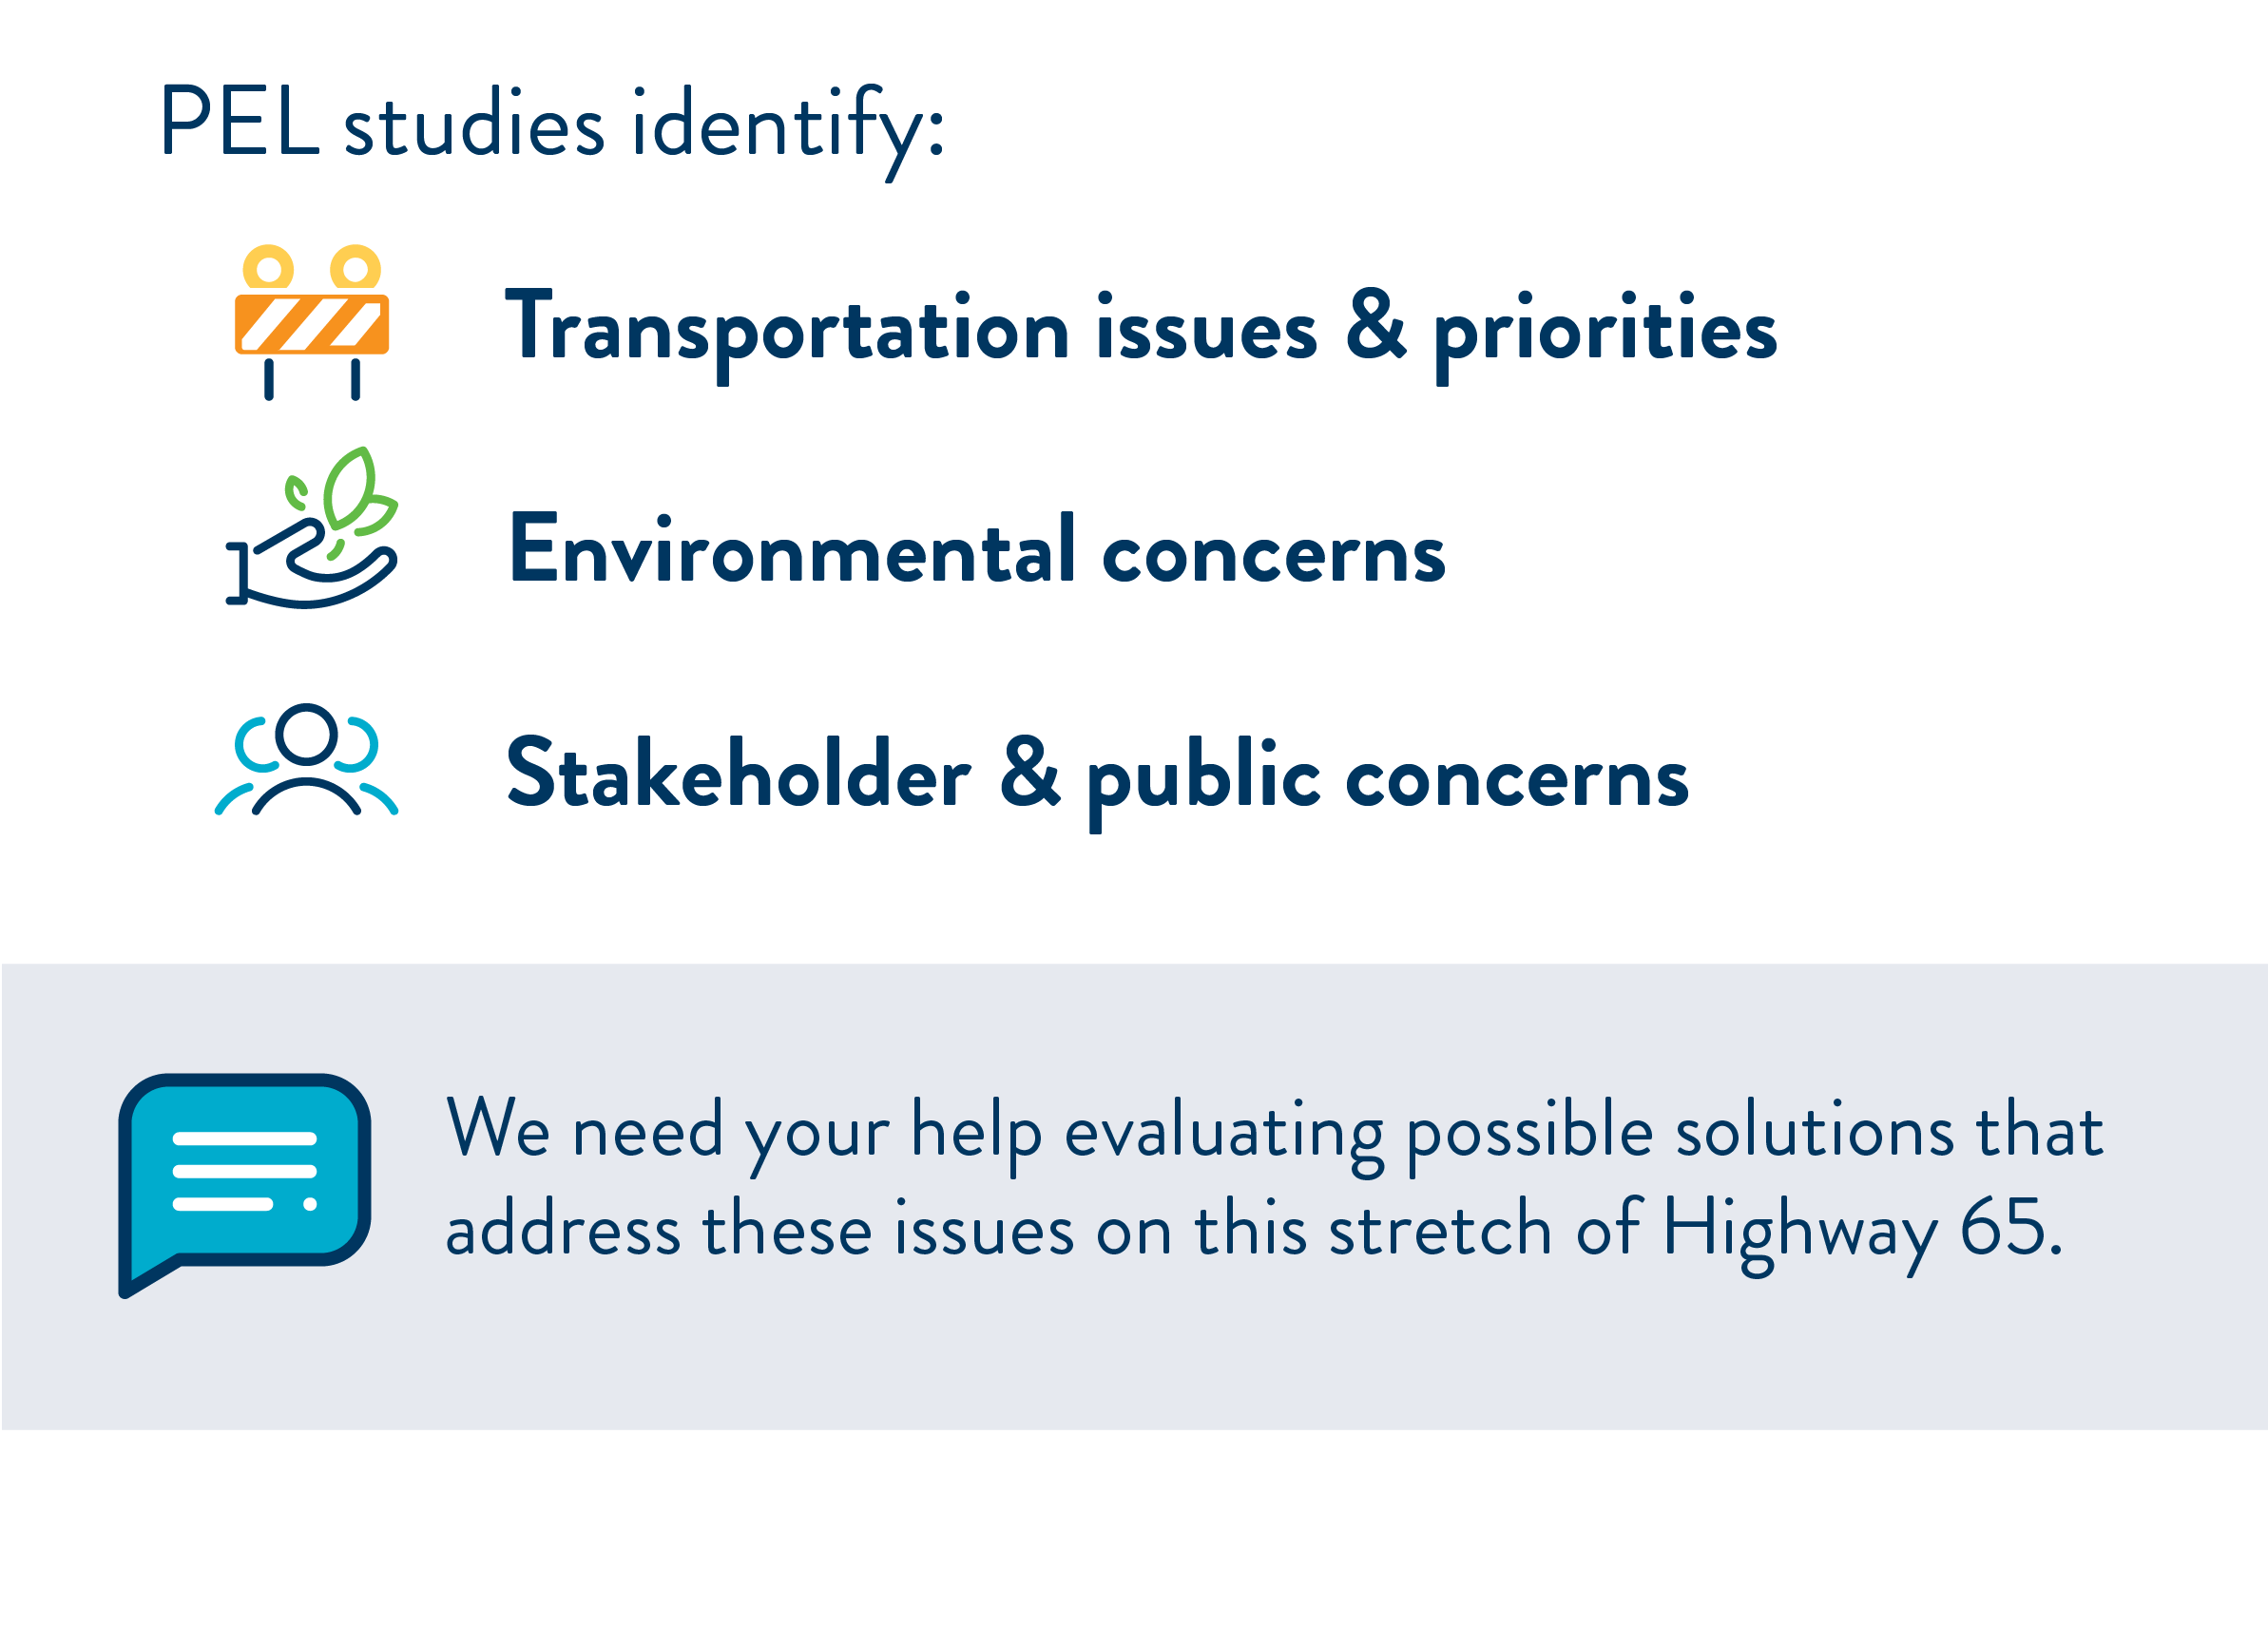 Graphic explanation of PEL study next steps: we need your input.